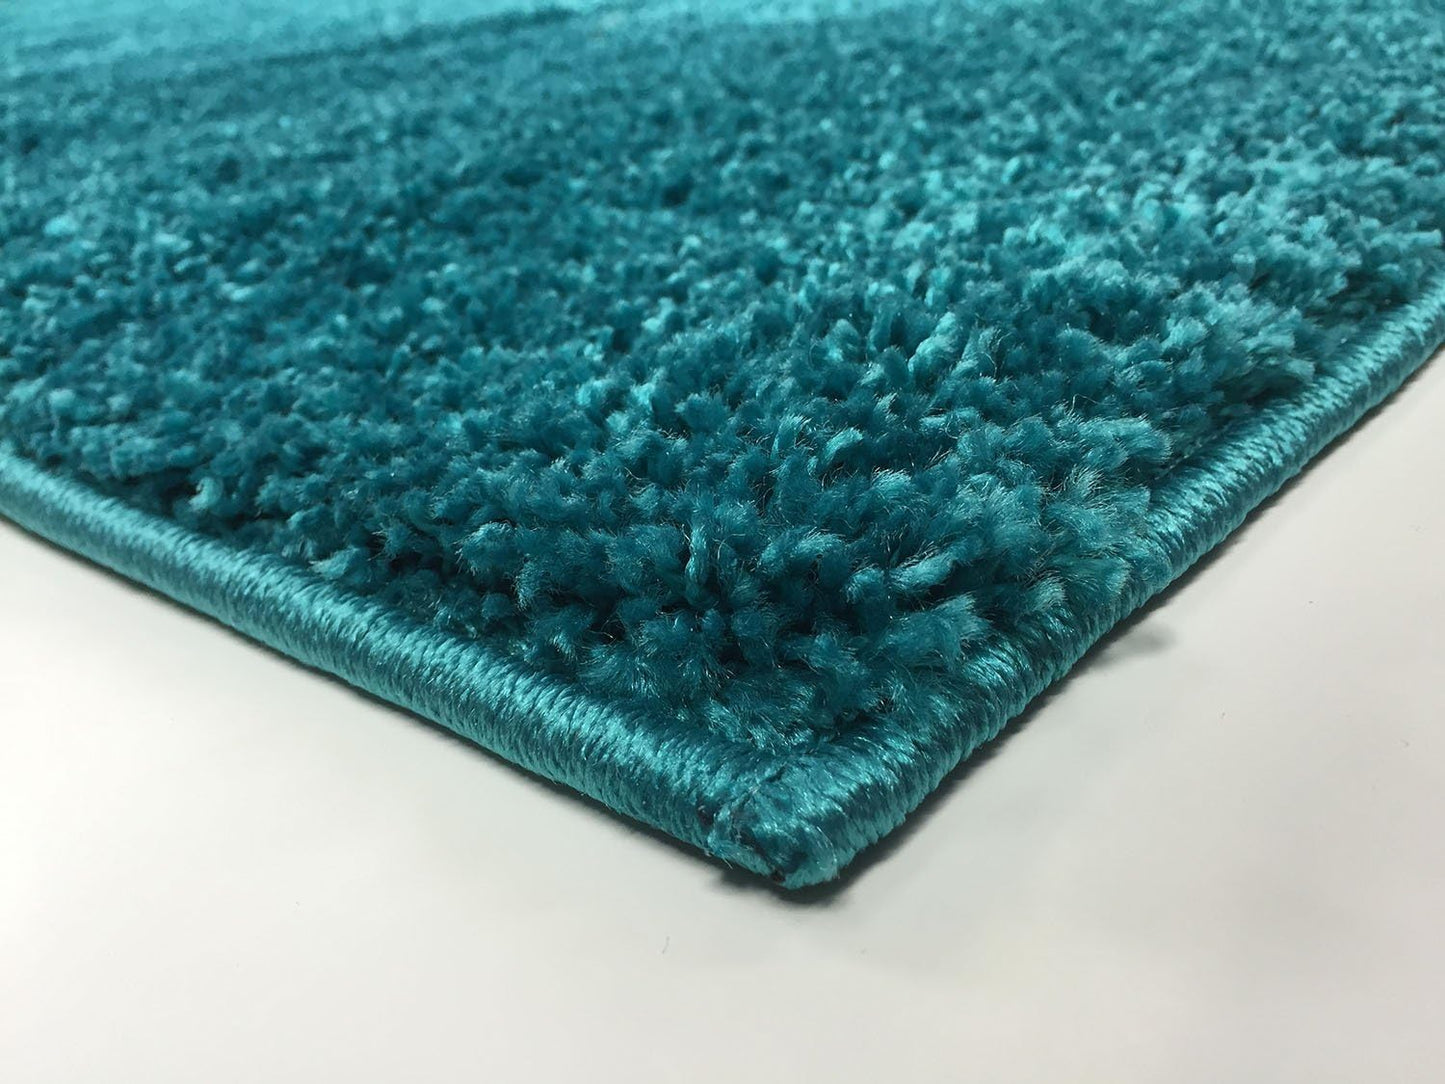 SOHO Shaggy Collection Solid Color Shag Area Rug (Turquoise Blue, 5 x 7)